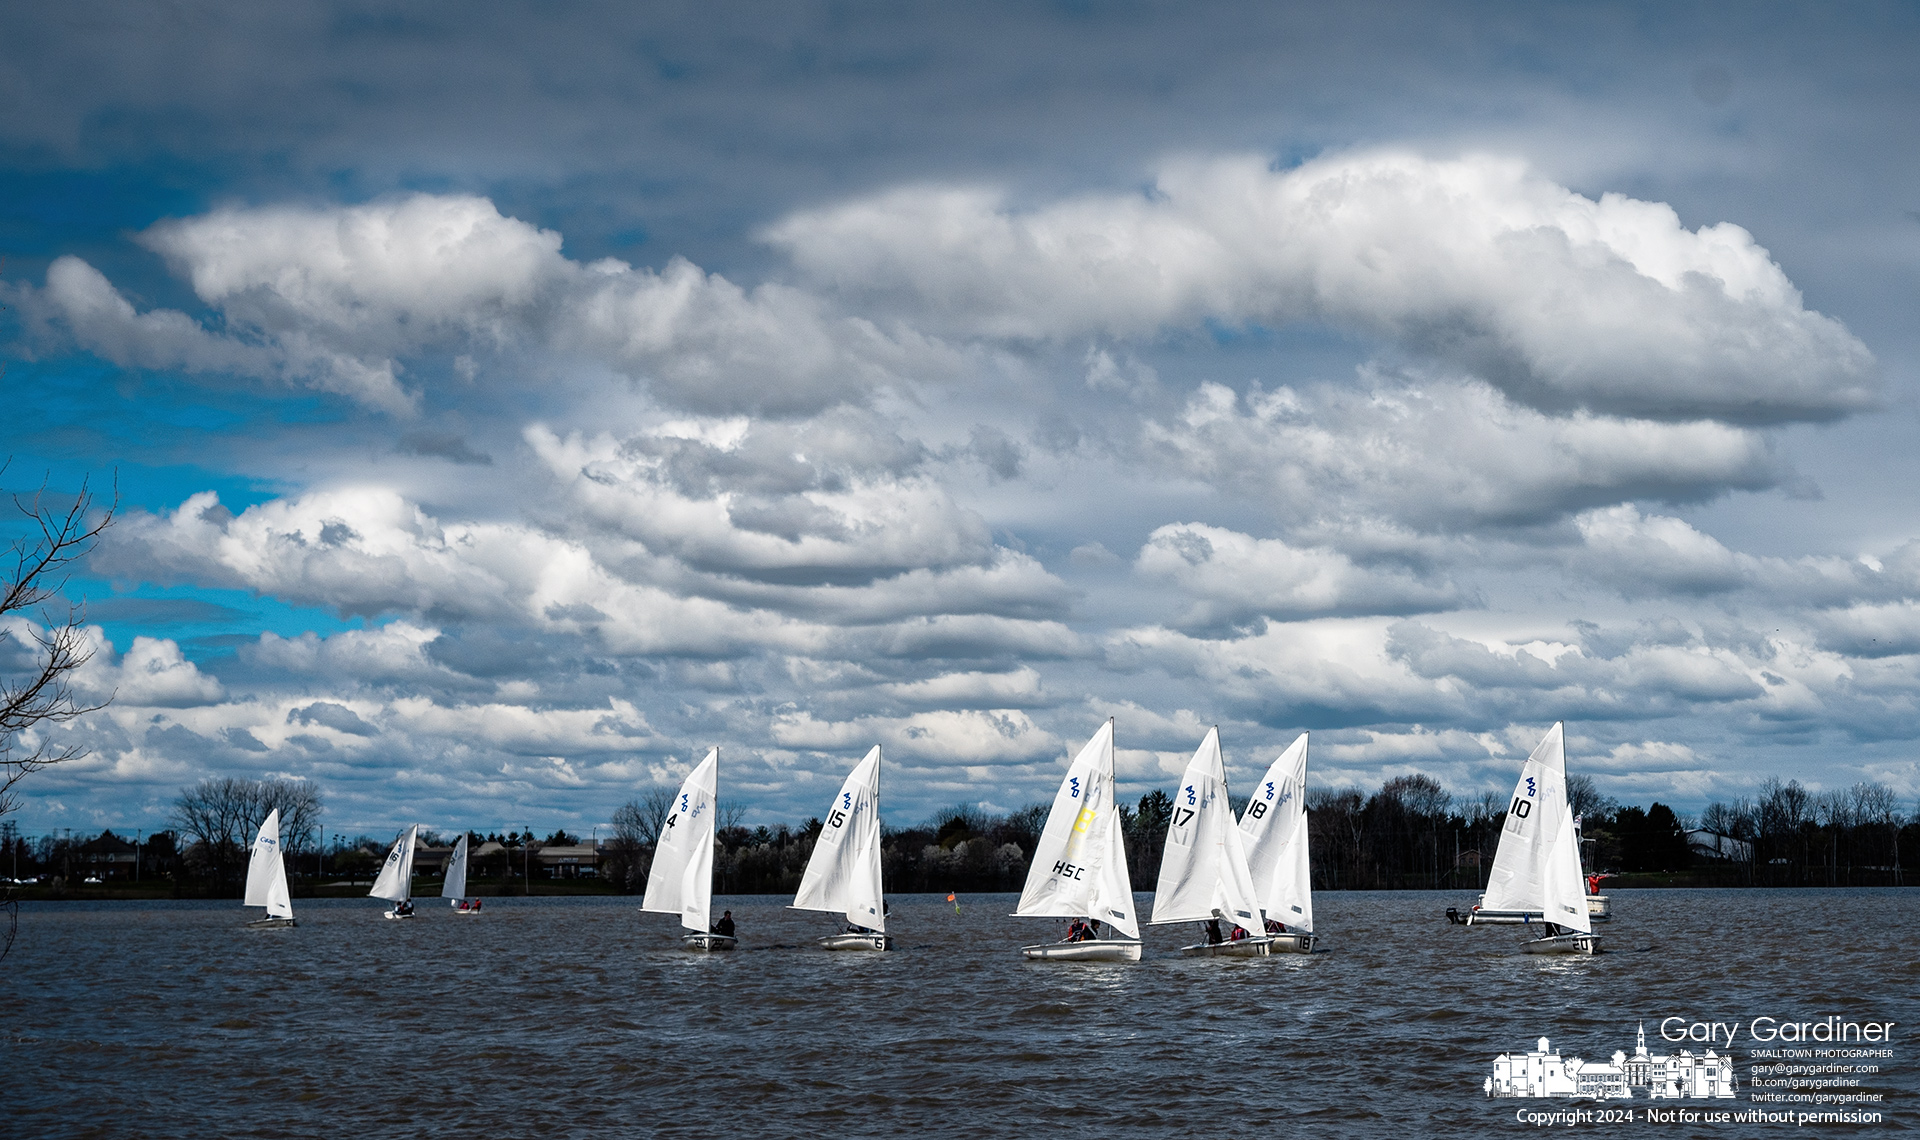 Sailors get aligned for the beginning of a race at the Ohio State Sectional Regatta at Hoover Sailing Club on Saturday. My Final Photo for April 6, 2024.